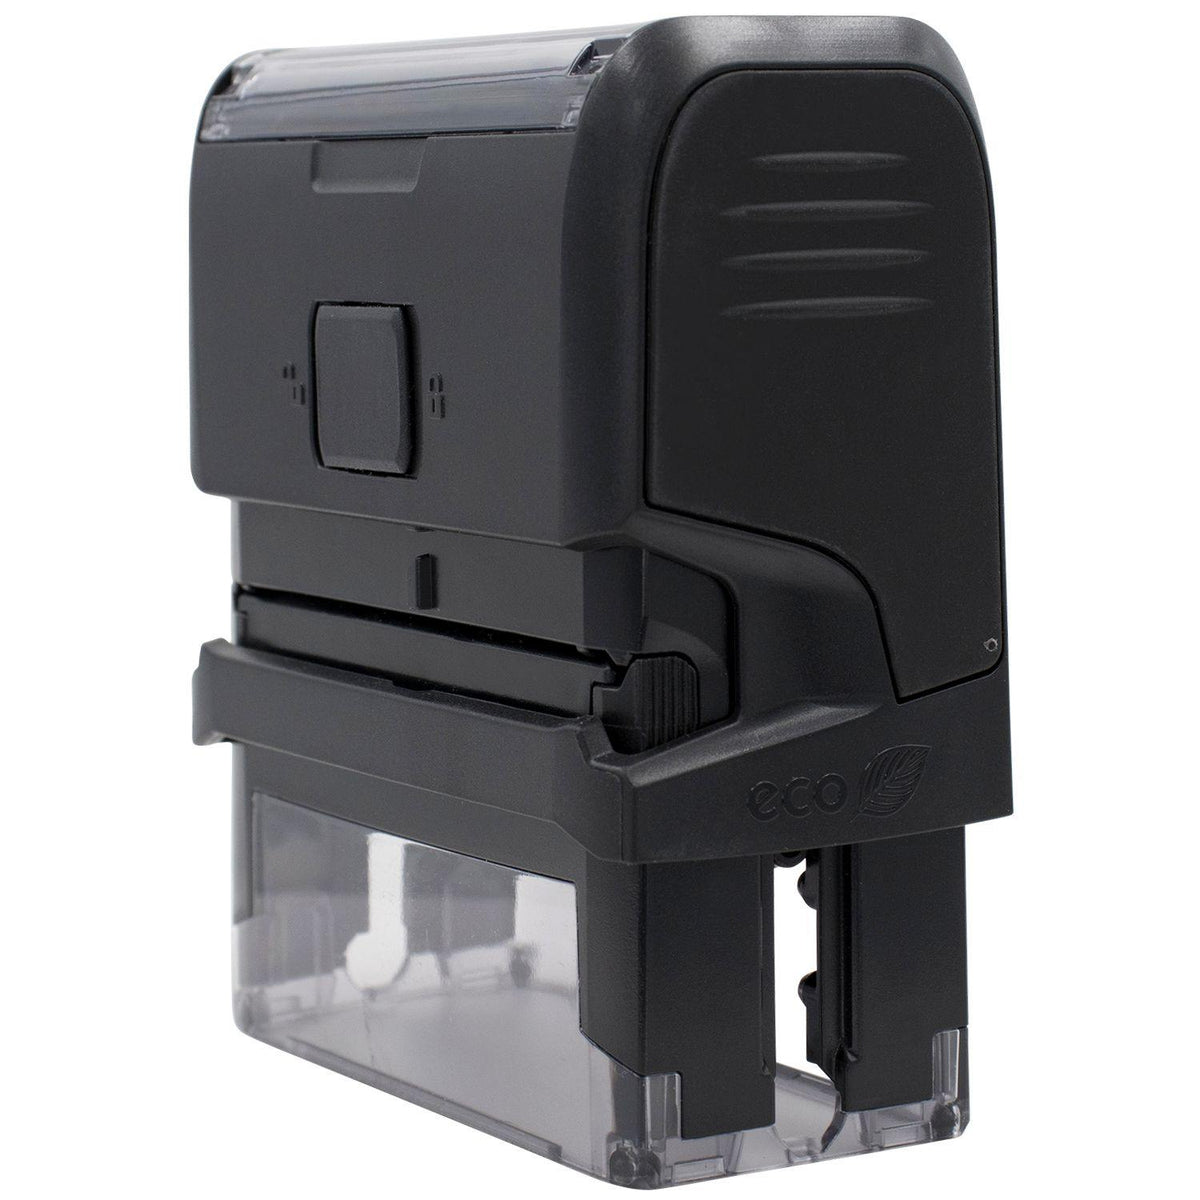 Self Inking Certified Copy Stamp - Engineer Seal Stamps - Brand_Trodat, Impression Size_Small, Stamp Type_Self-Inking Stamp, Type of Use_Office